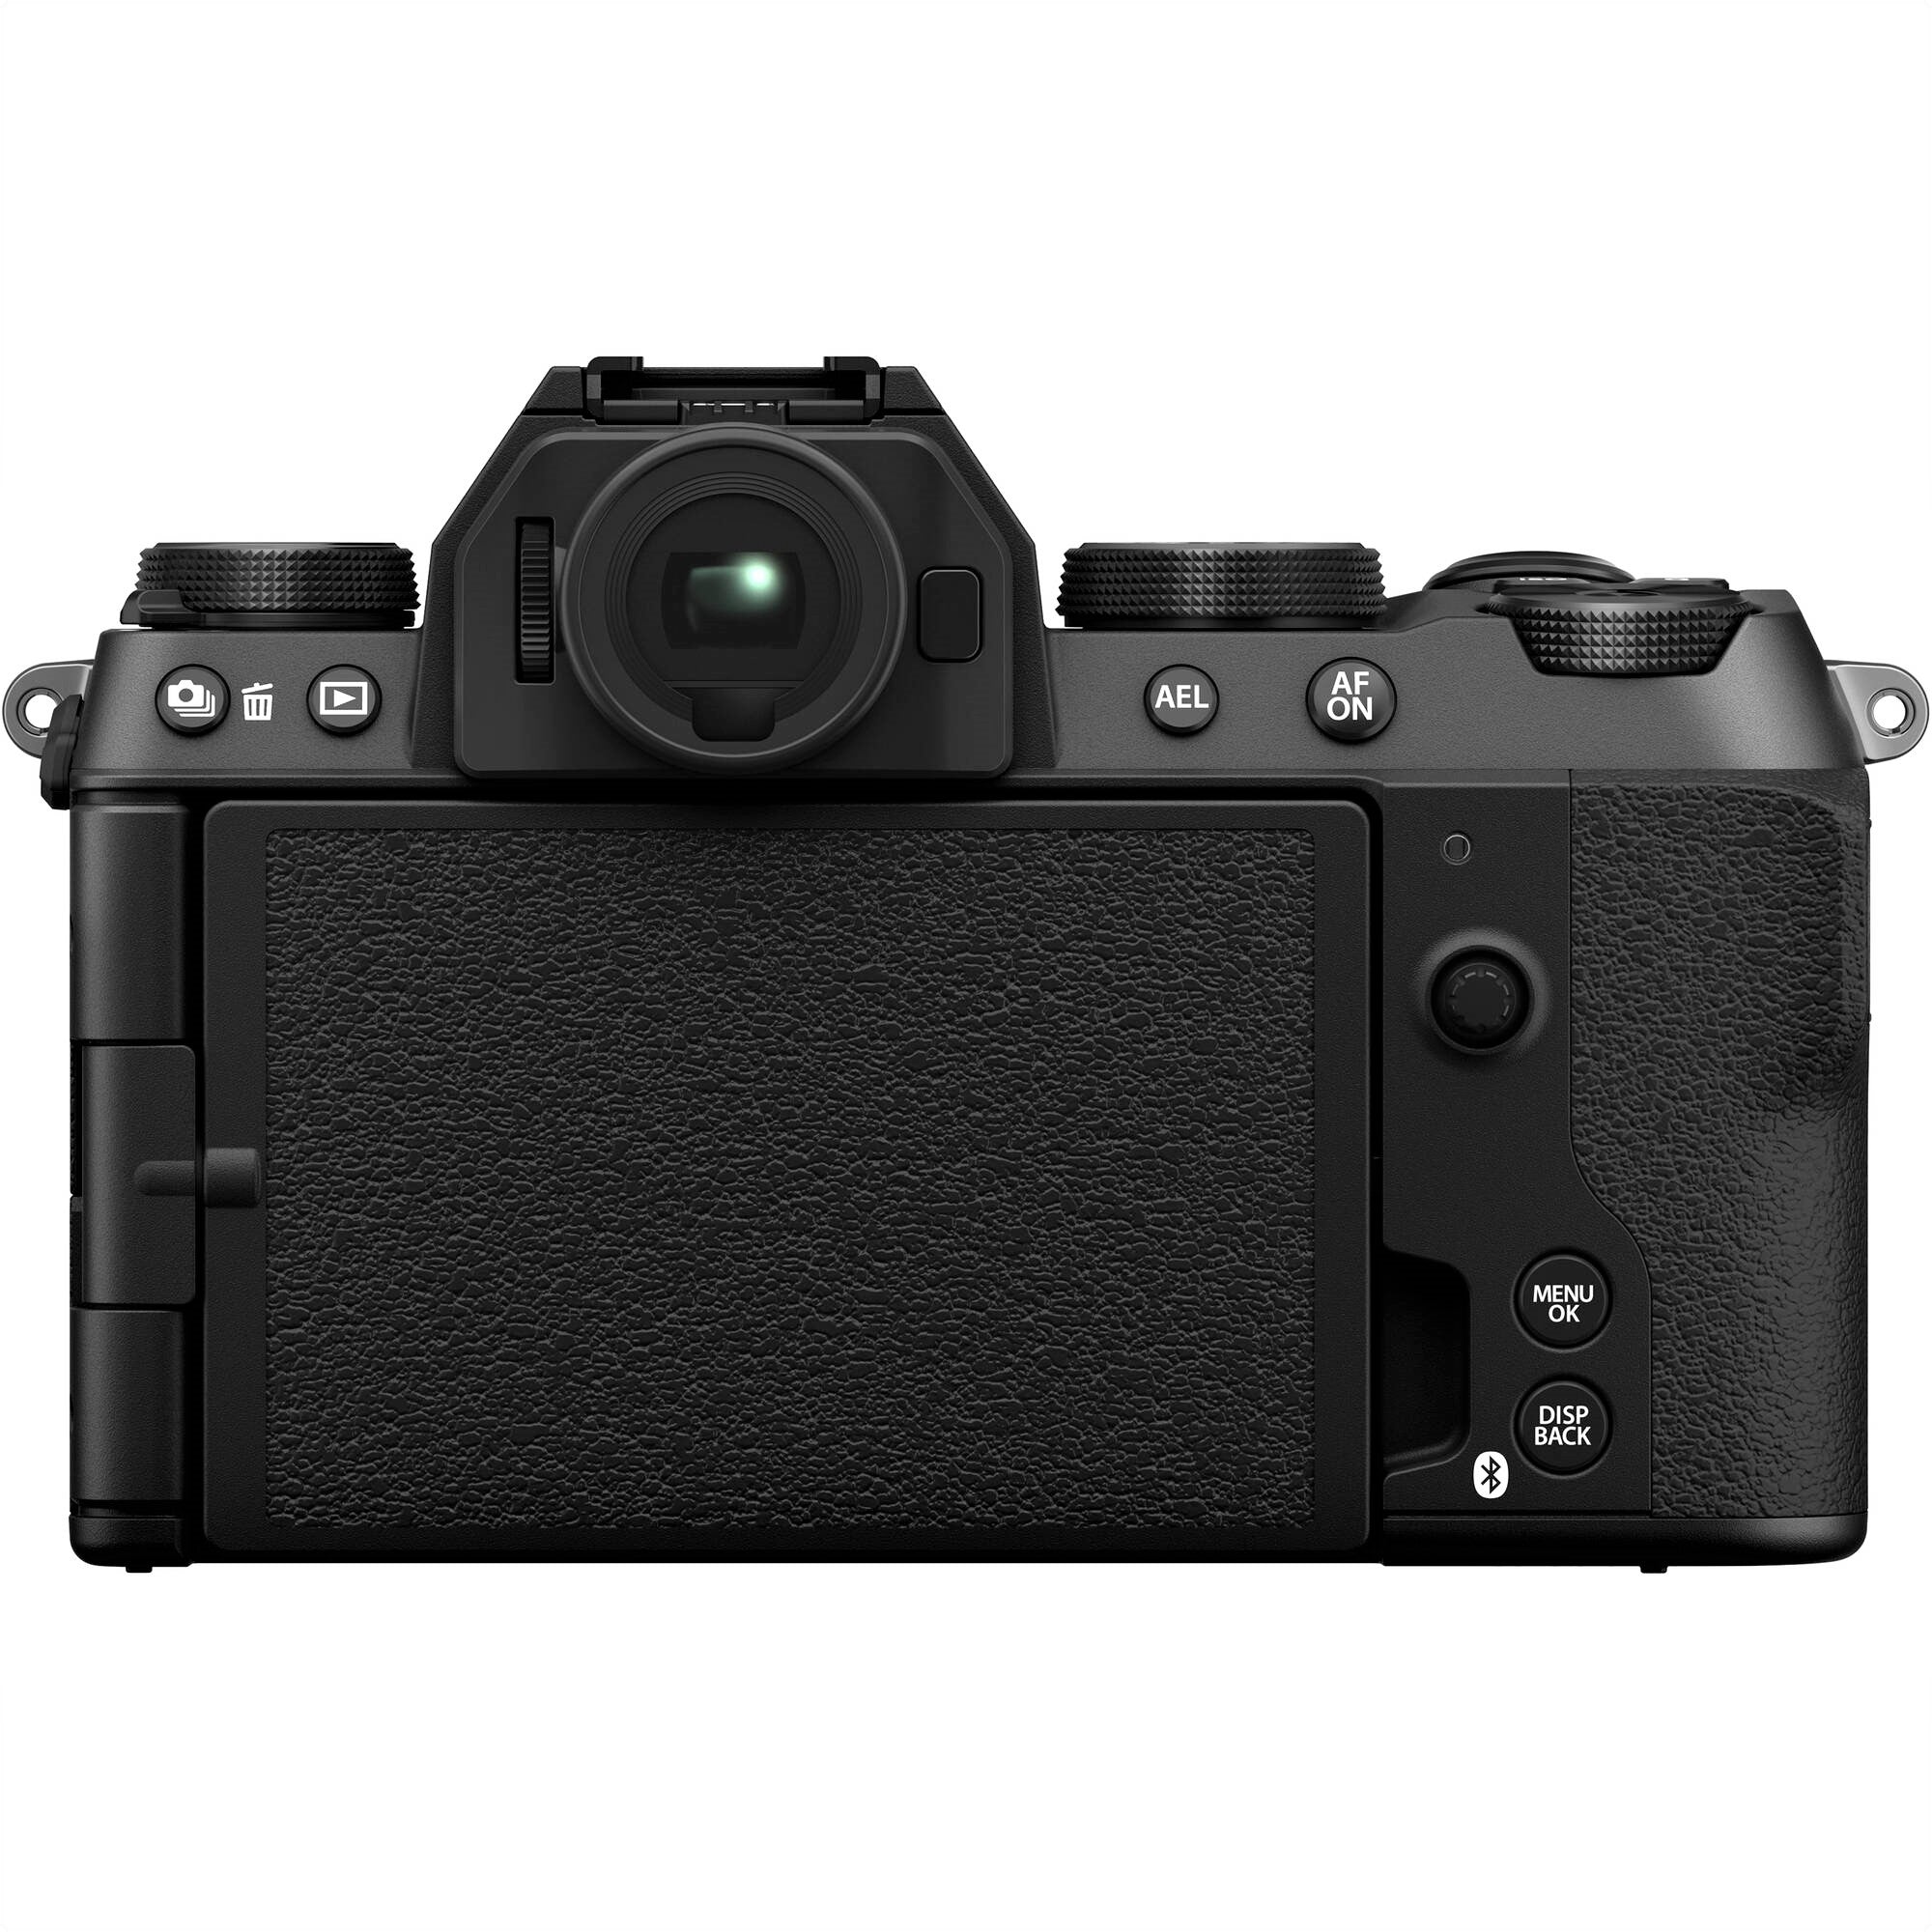 Fujifilm X-S20 Mirrorless Digital Camera with 15-45mm Lens Buy and 